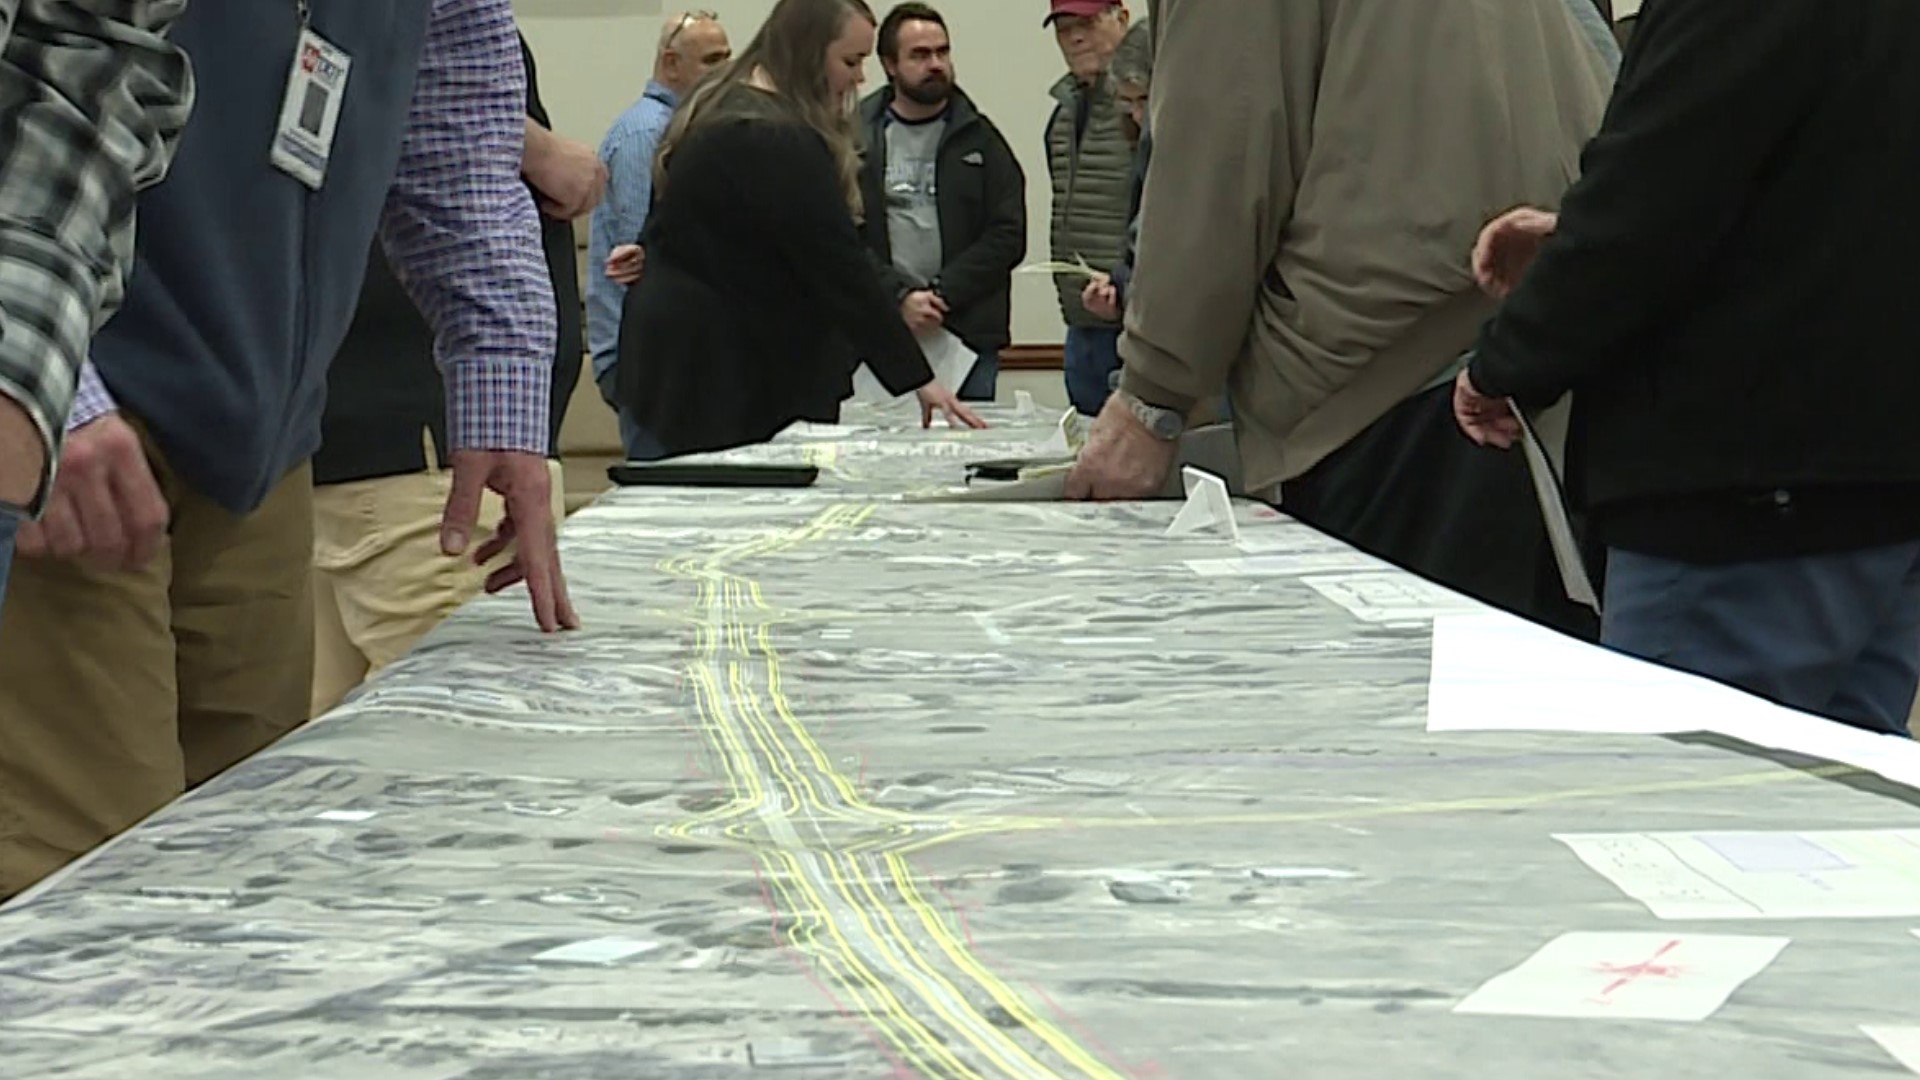 The Arkansas Dept. of Transportation held a meeting to discuss widening highway 112 through Fayetteville, Springdale, and Tontitown.